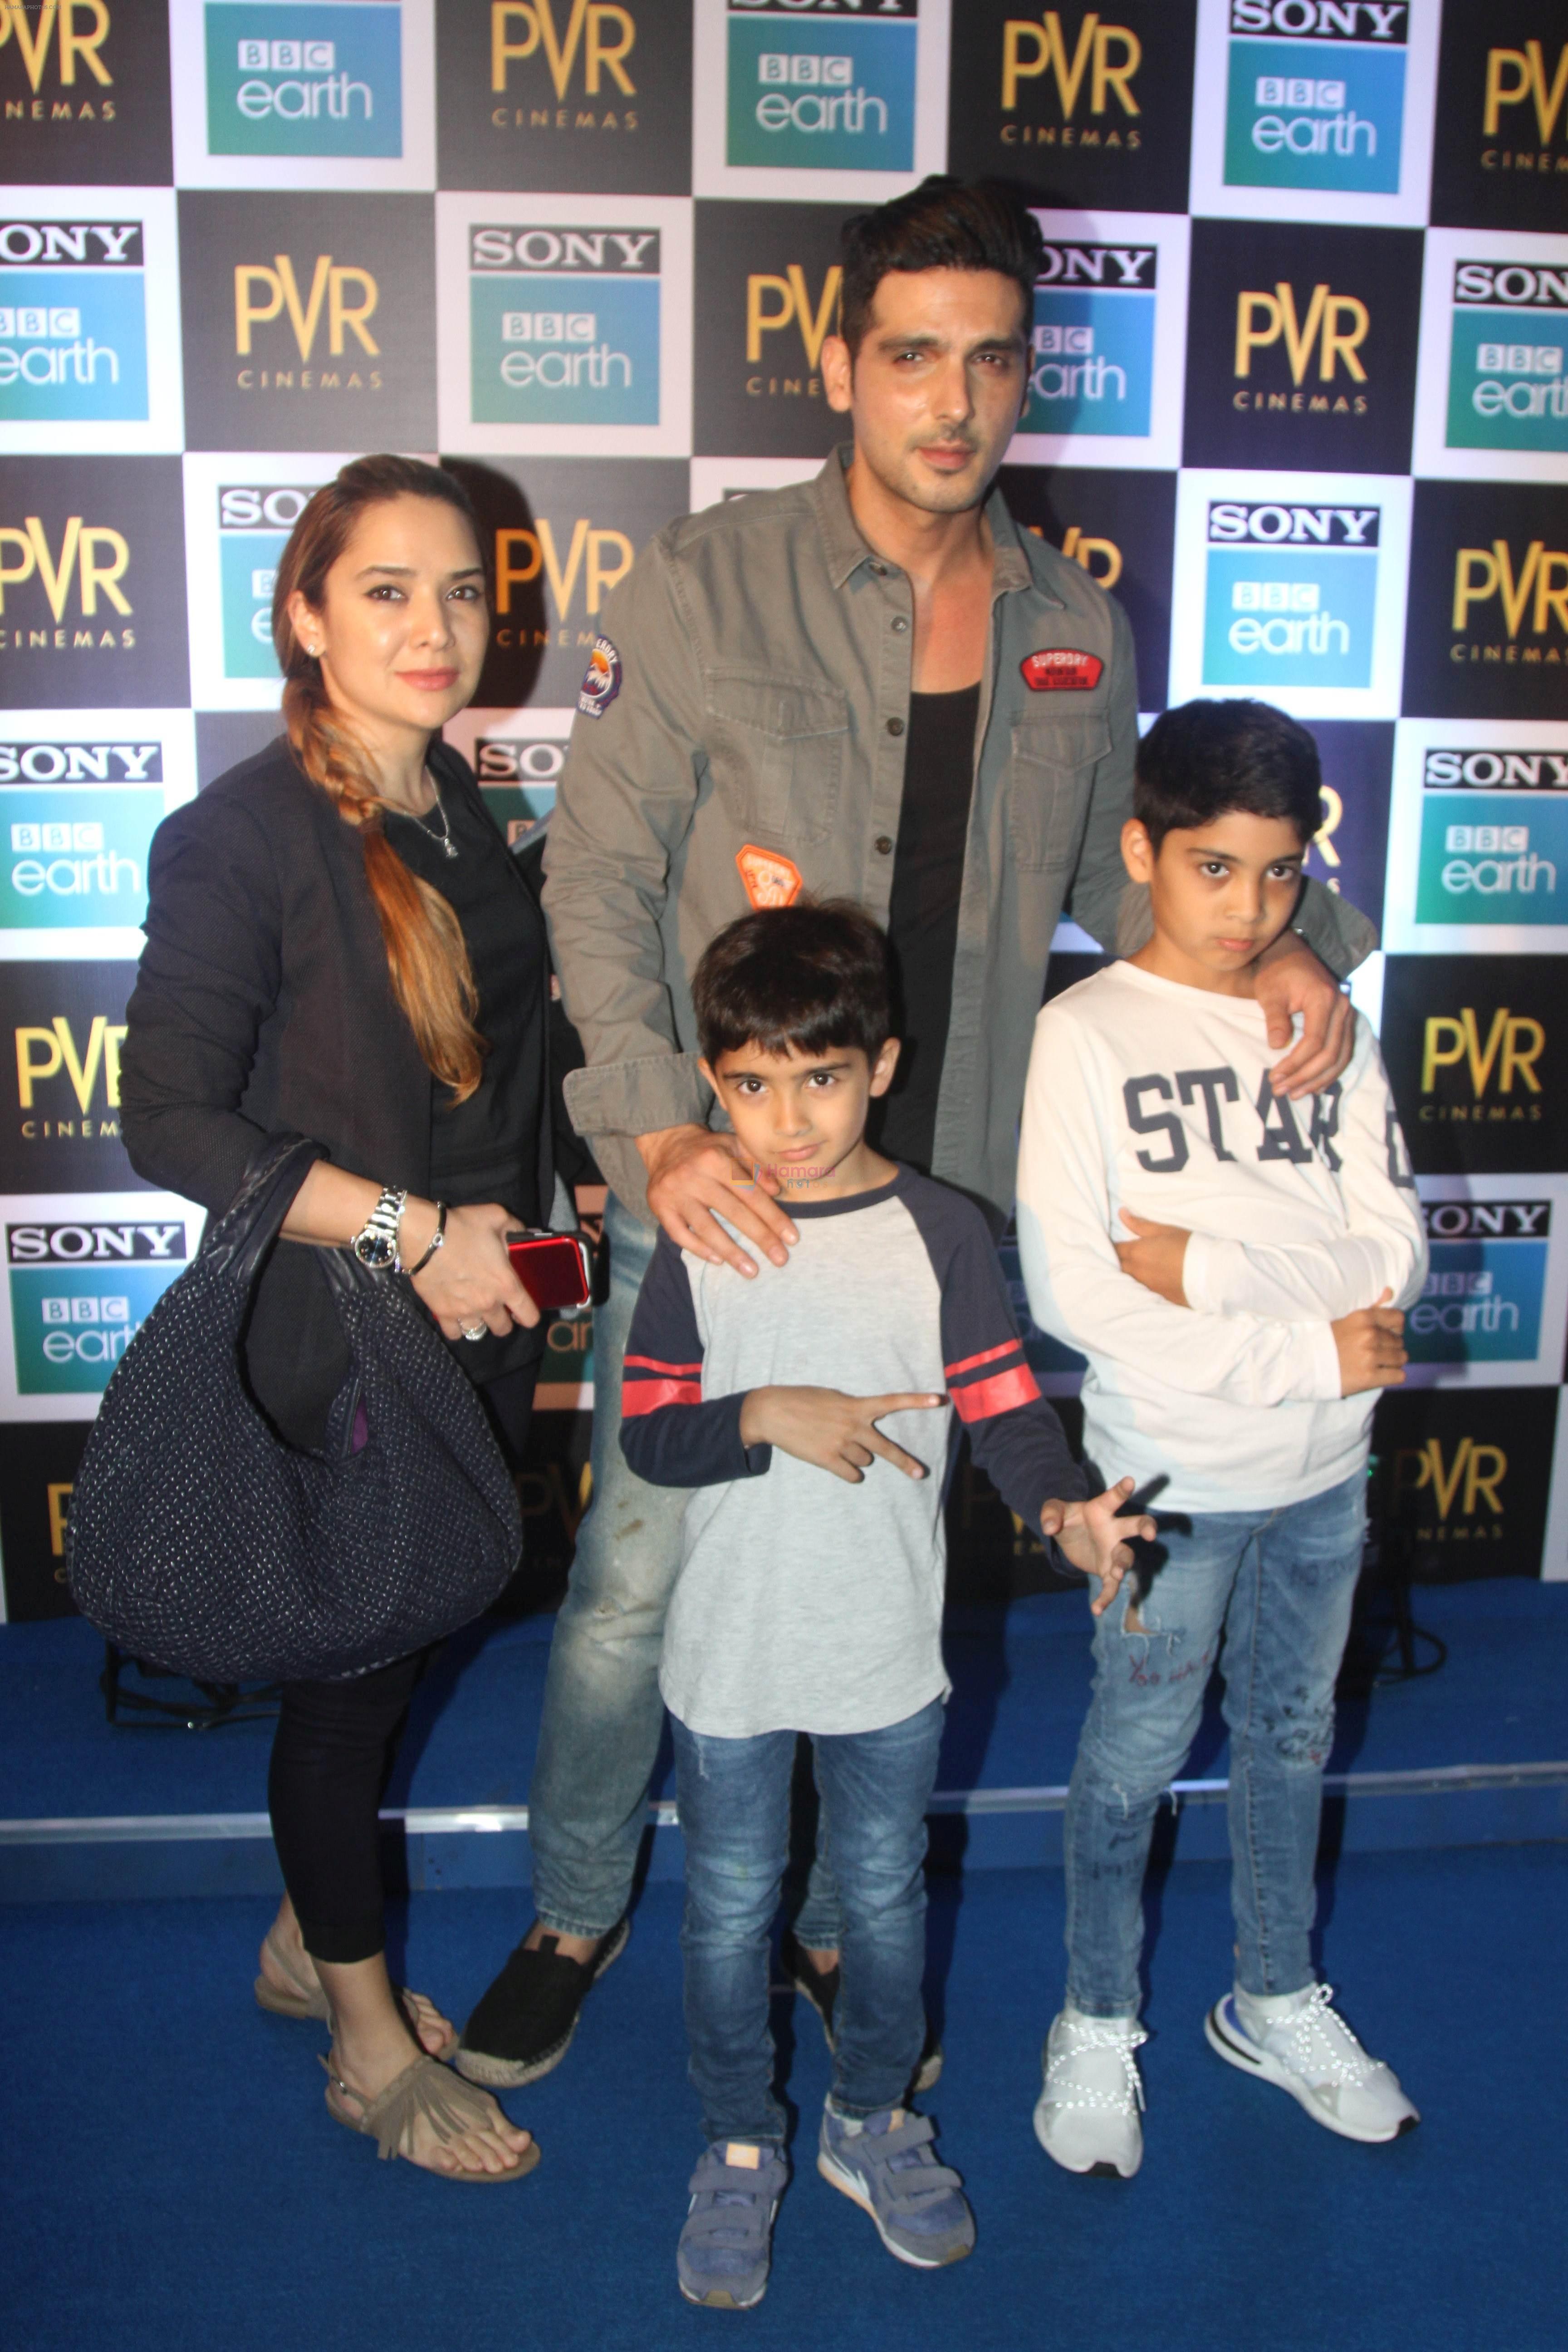 Zayed Khan at the Screening of Sony BBC Earth's film Blue Planet 2 at pvr icon in andheri on 15th May 2018